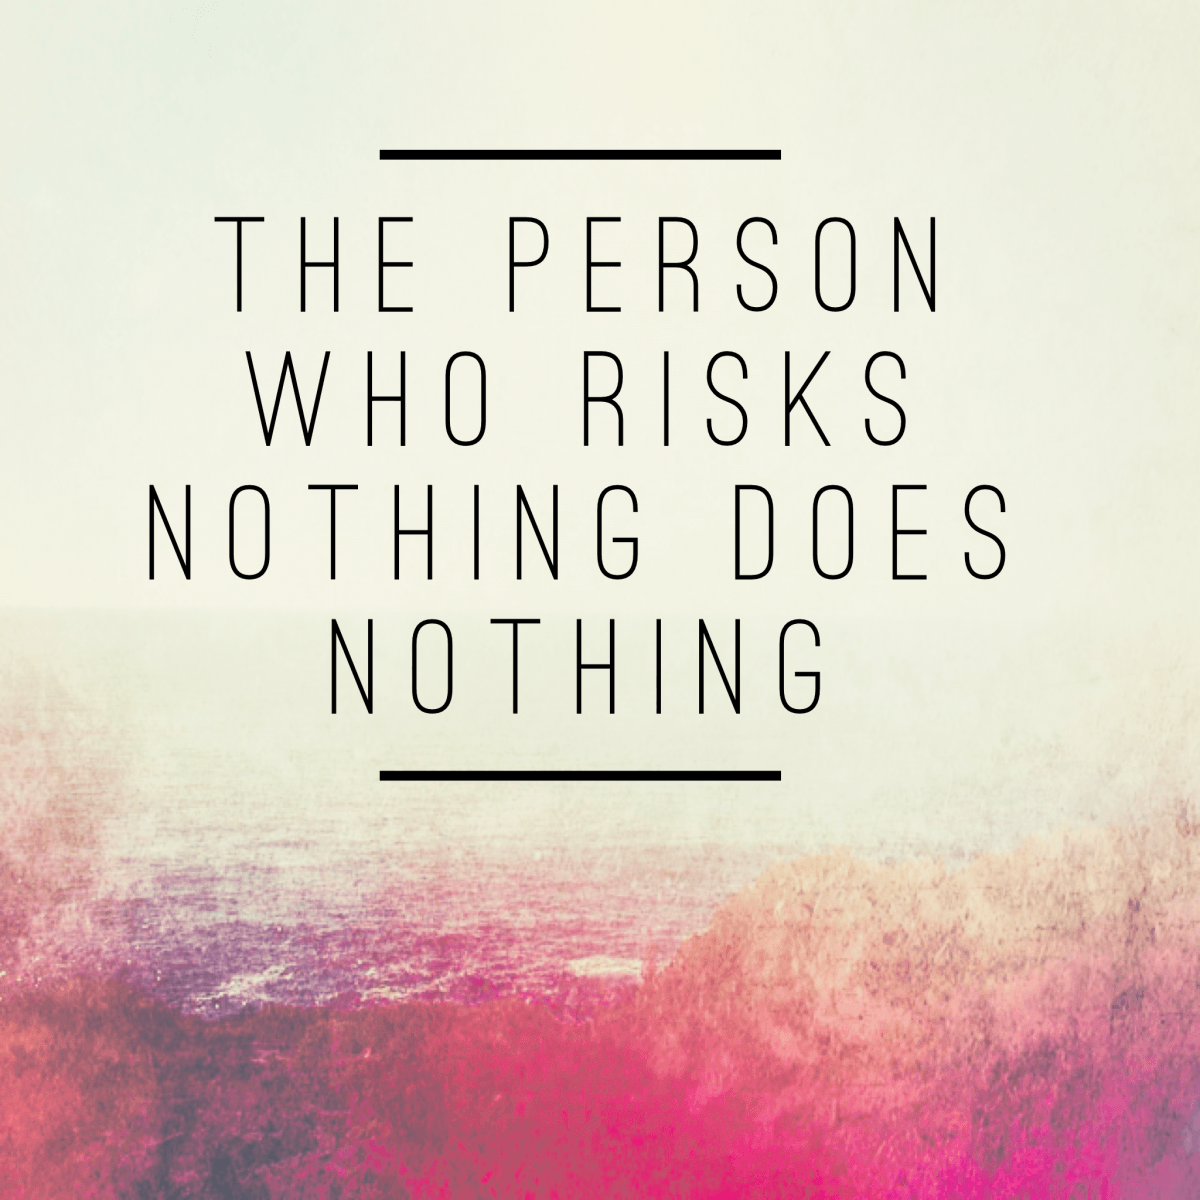 Risk Quote. HD Motivation Wallpaper for Mobile and Desktop